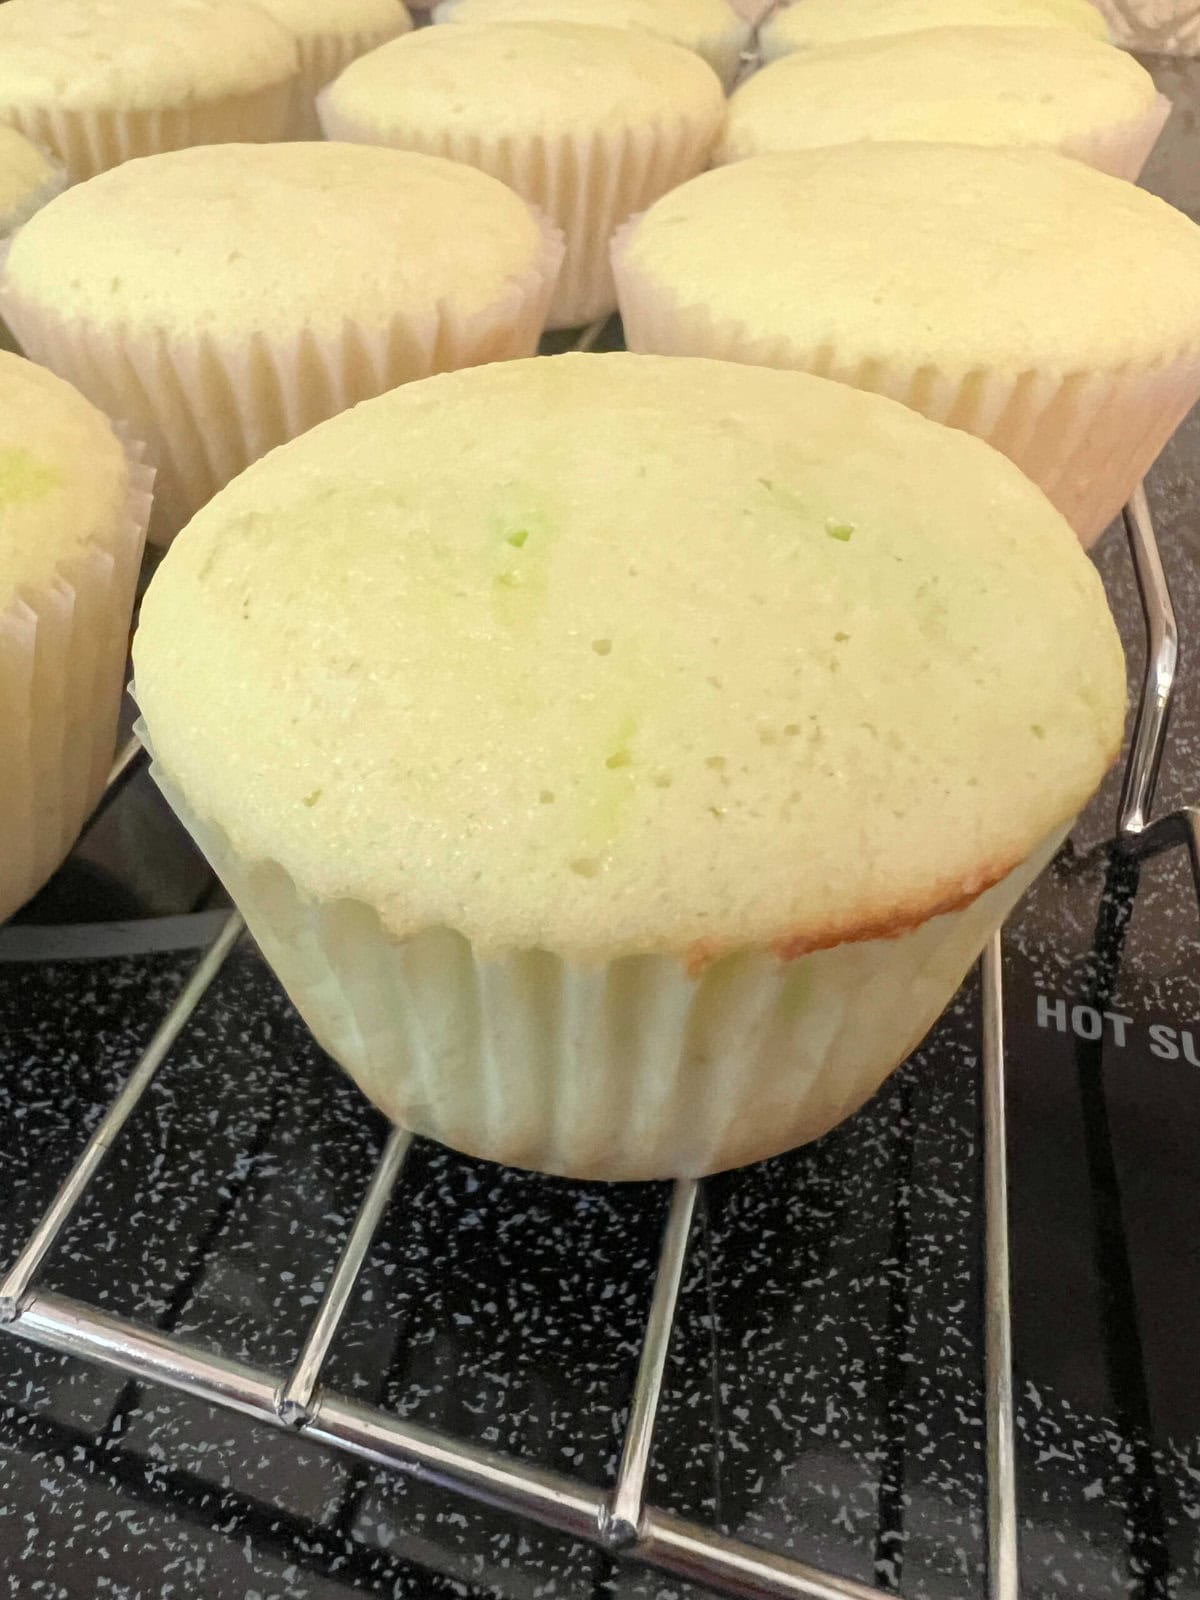 Lime cupcakes cooling on a cooling rack.